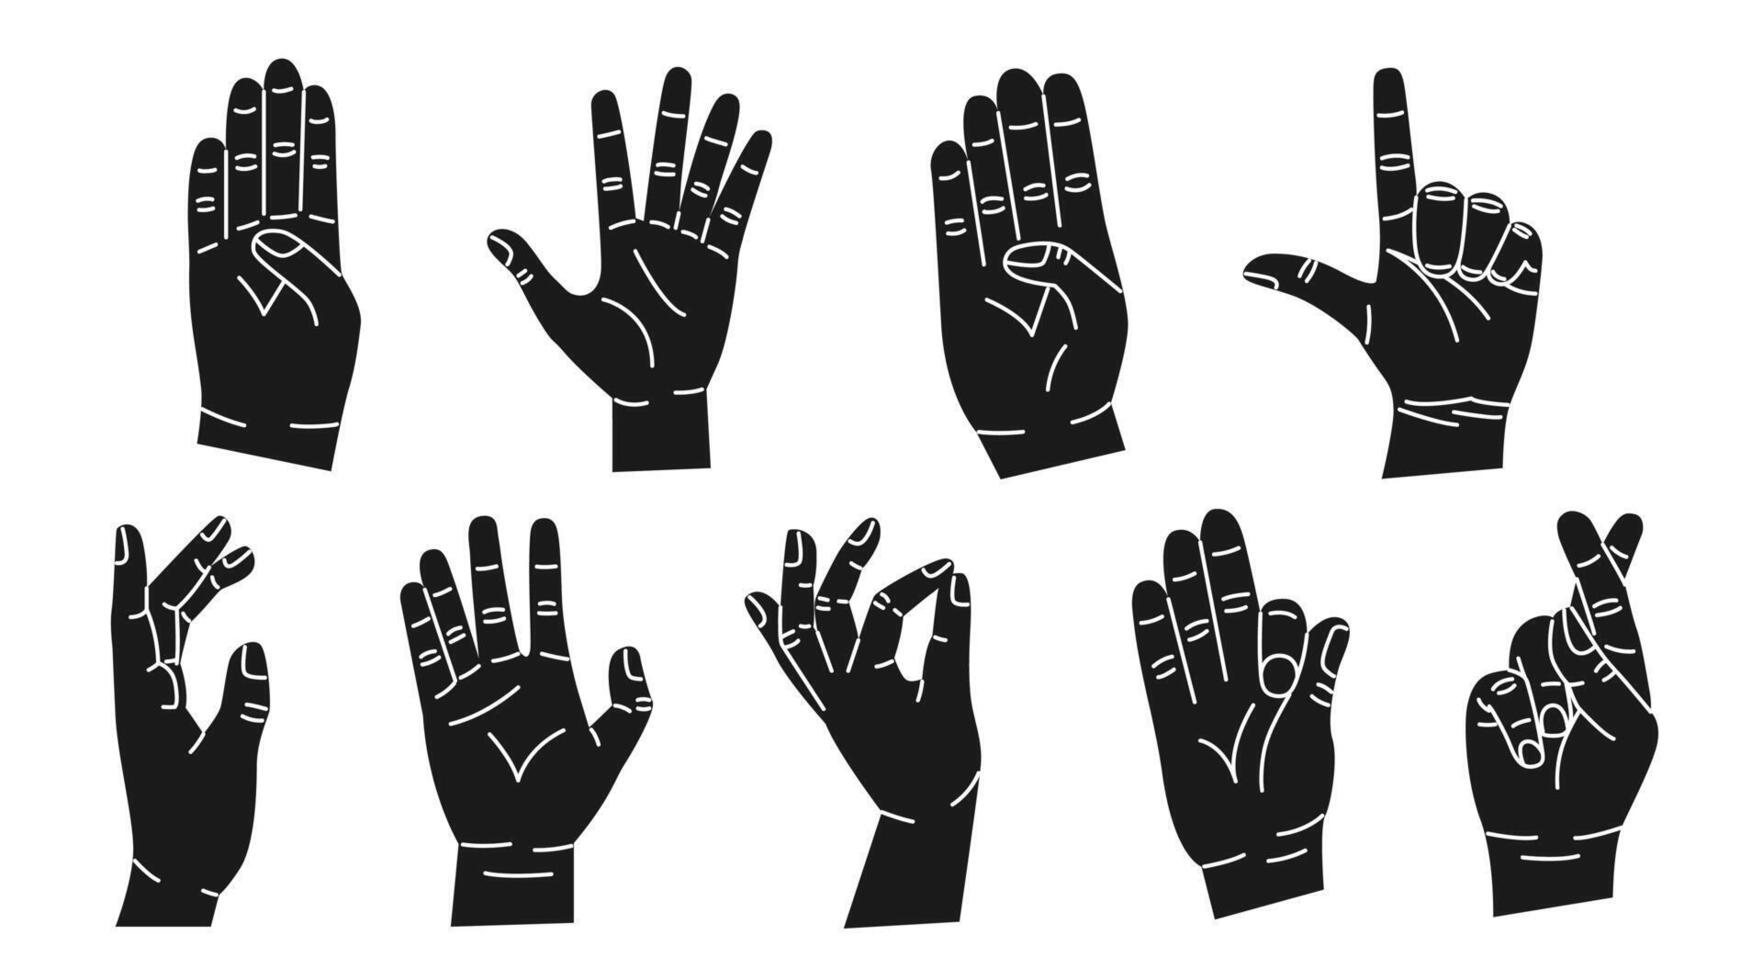 Set of black hands with different gestures. Modern trendy flat style. Hand drawn illustration. Hands show different signs and symbols. Body language for communication. On white background vector